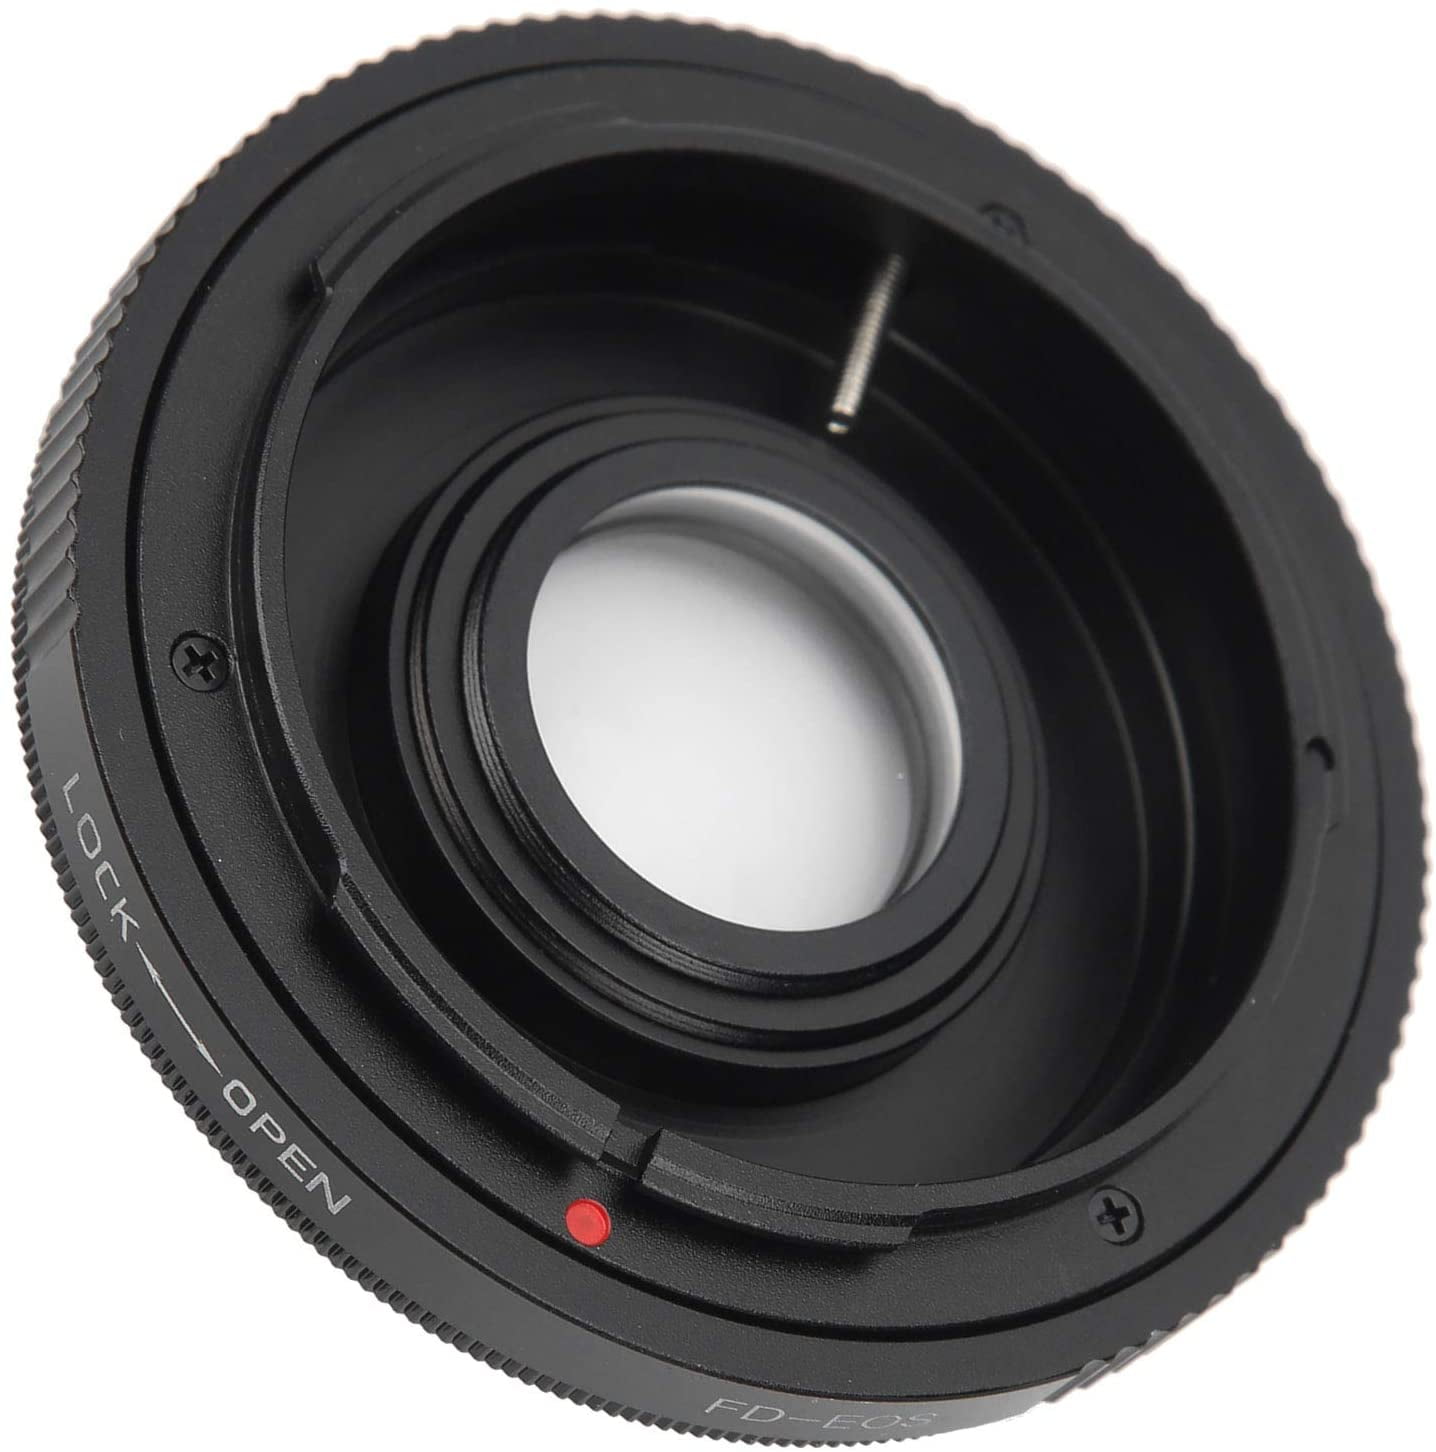 FD-EOS Ring Adapter Lens Adapter FD Lens to EF for Canon EOS Mount uk 